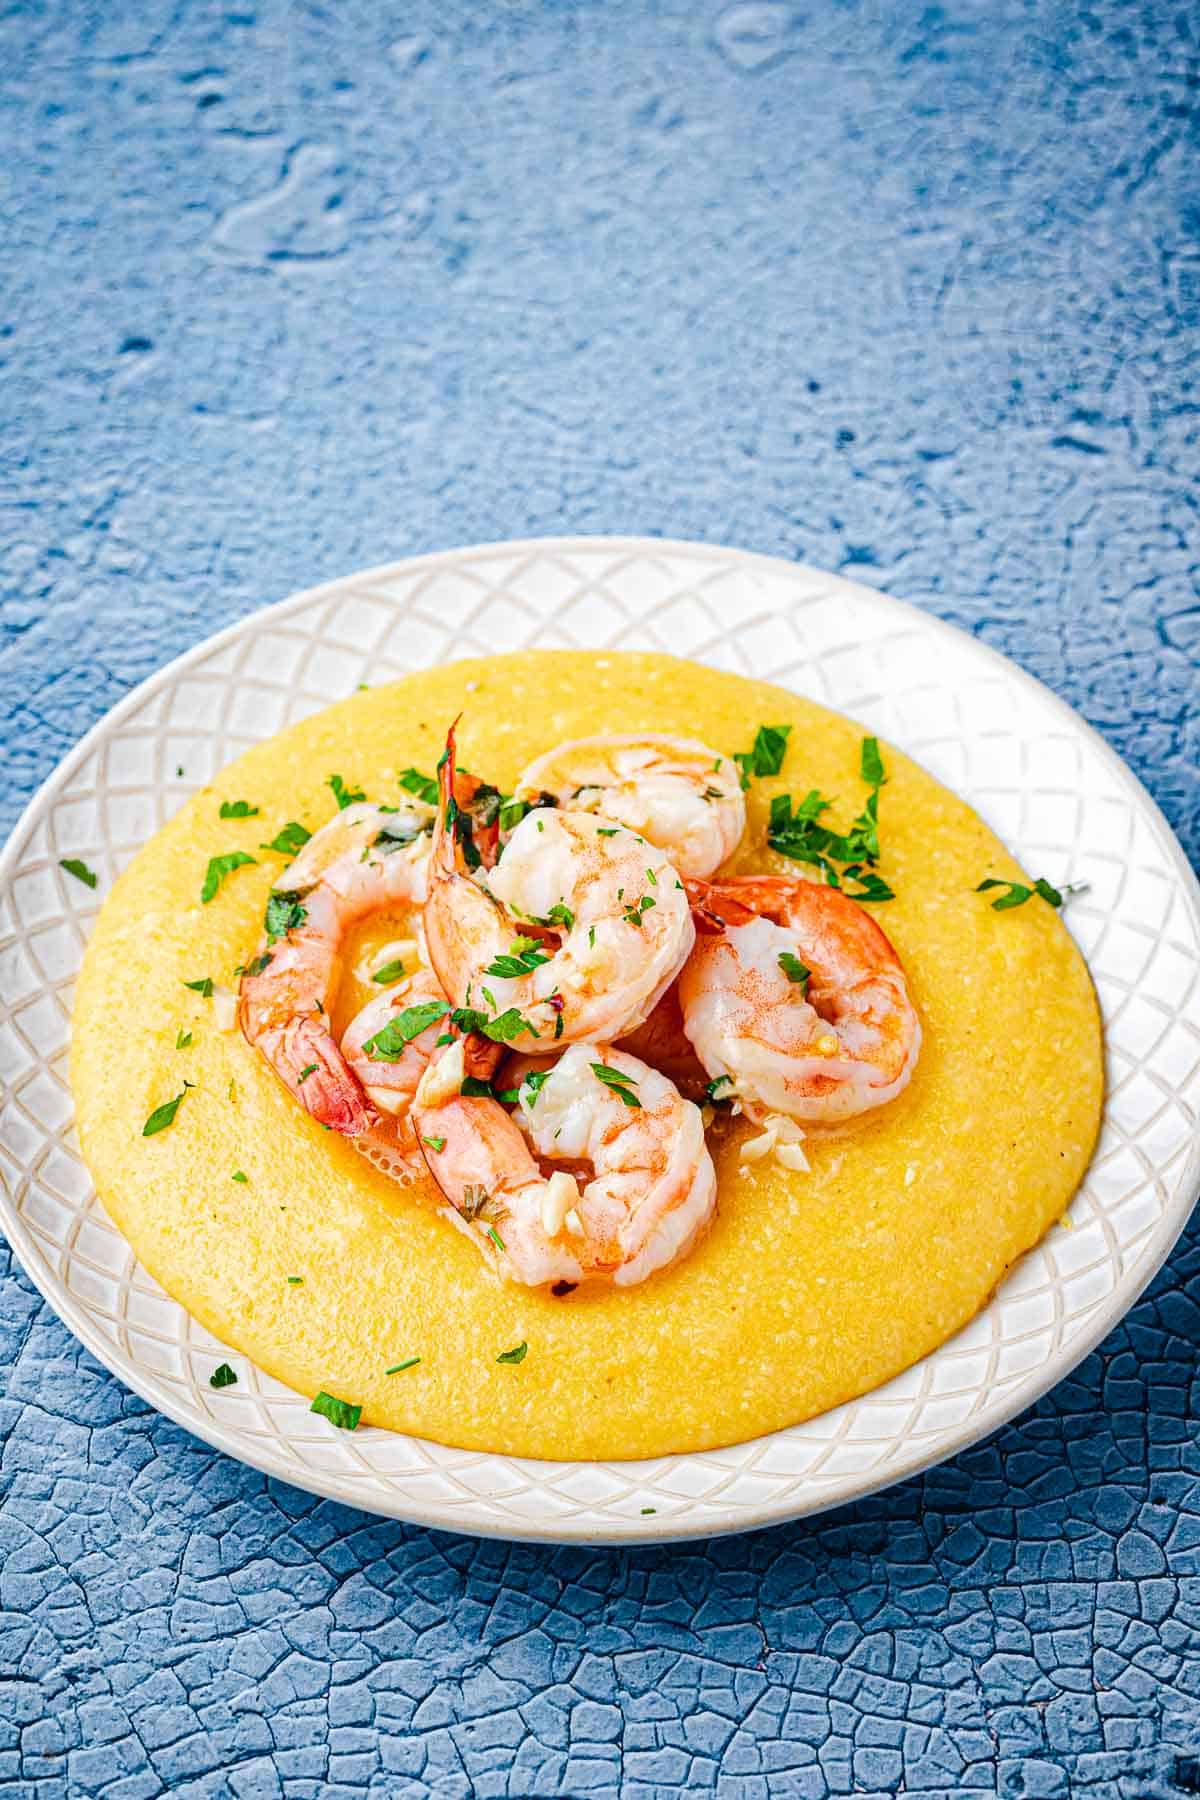 a plate of polenta and shrimp garnished with parsley.